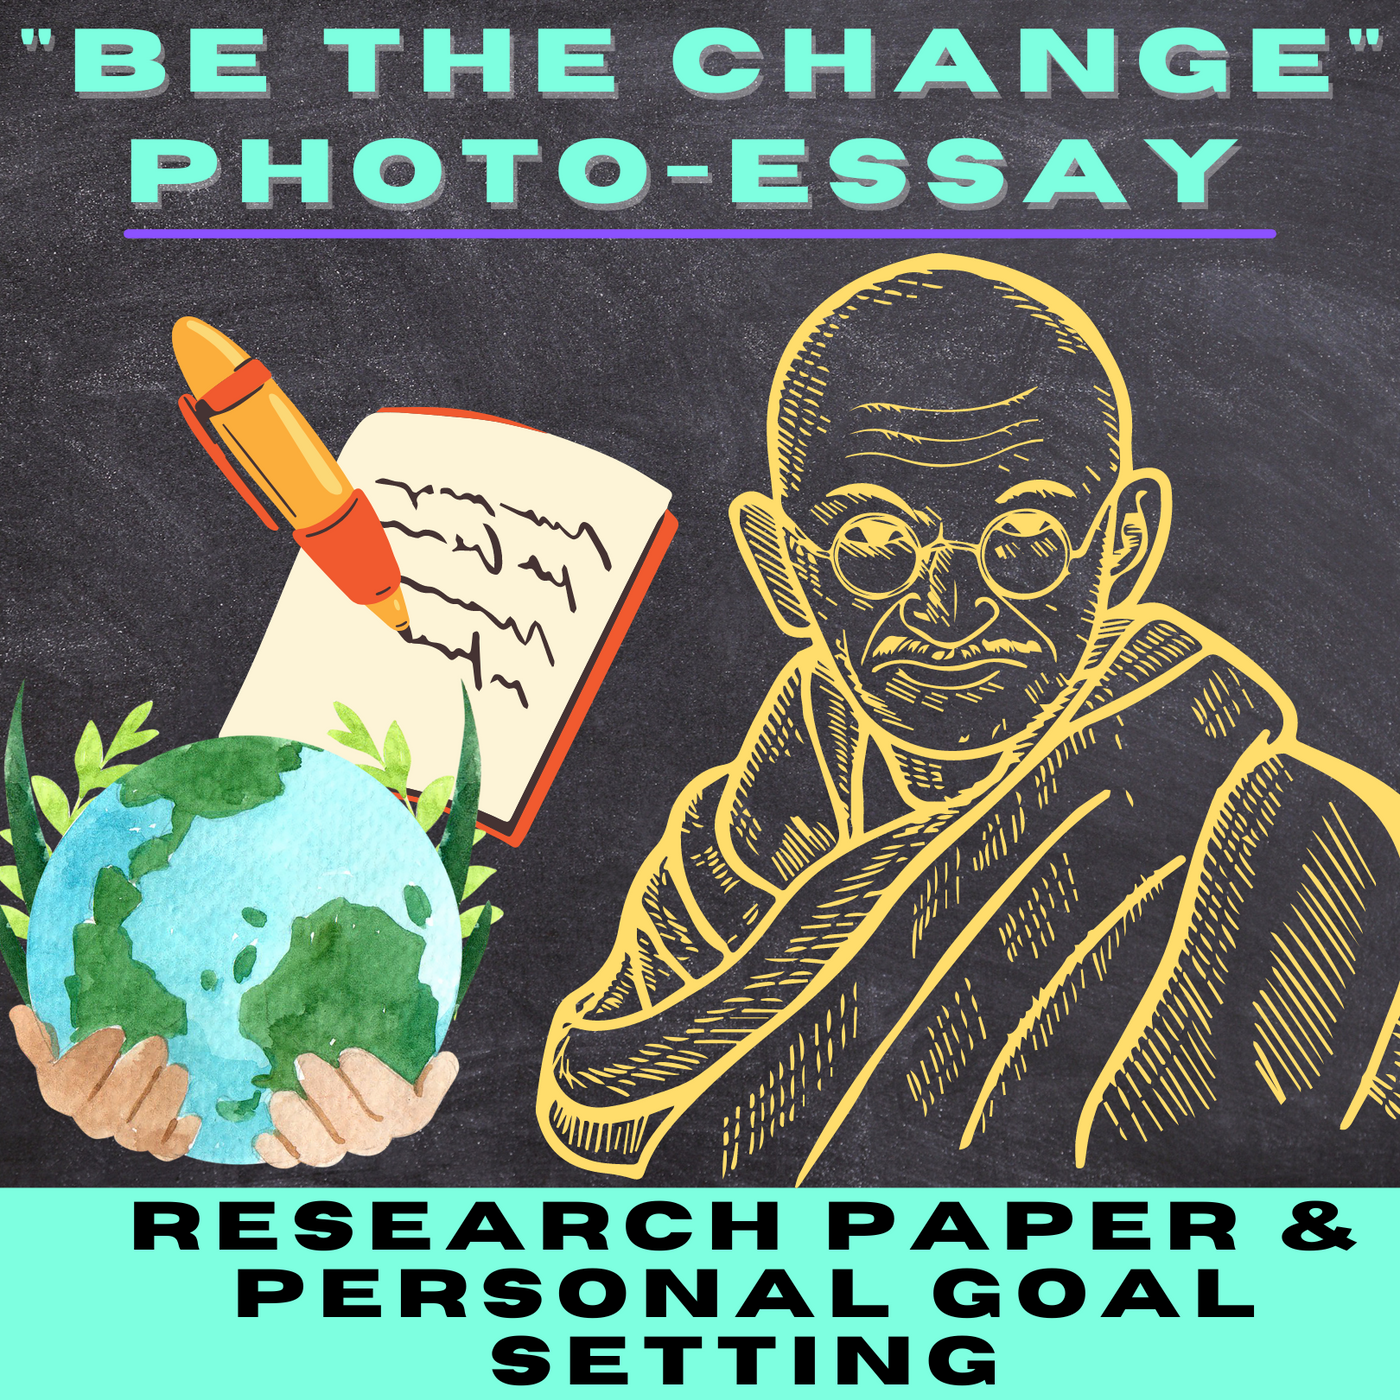 "Be the Change" Essay